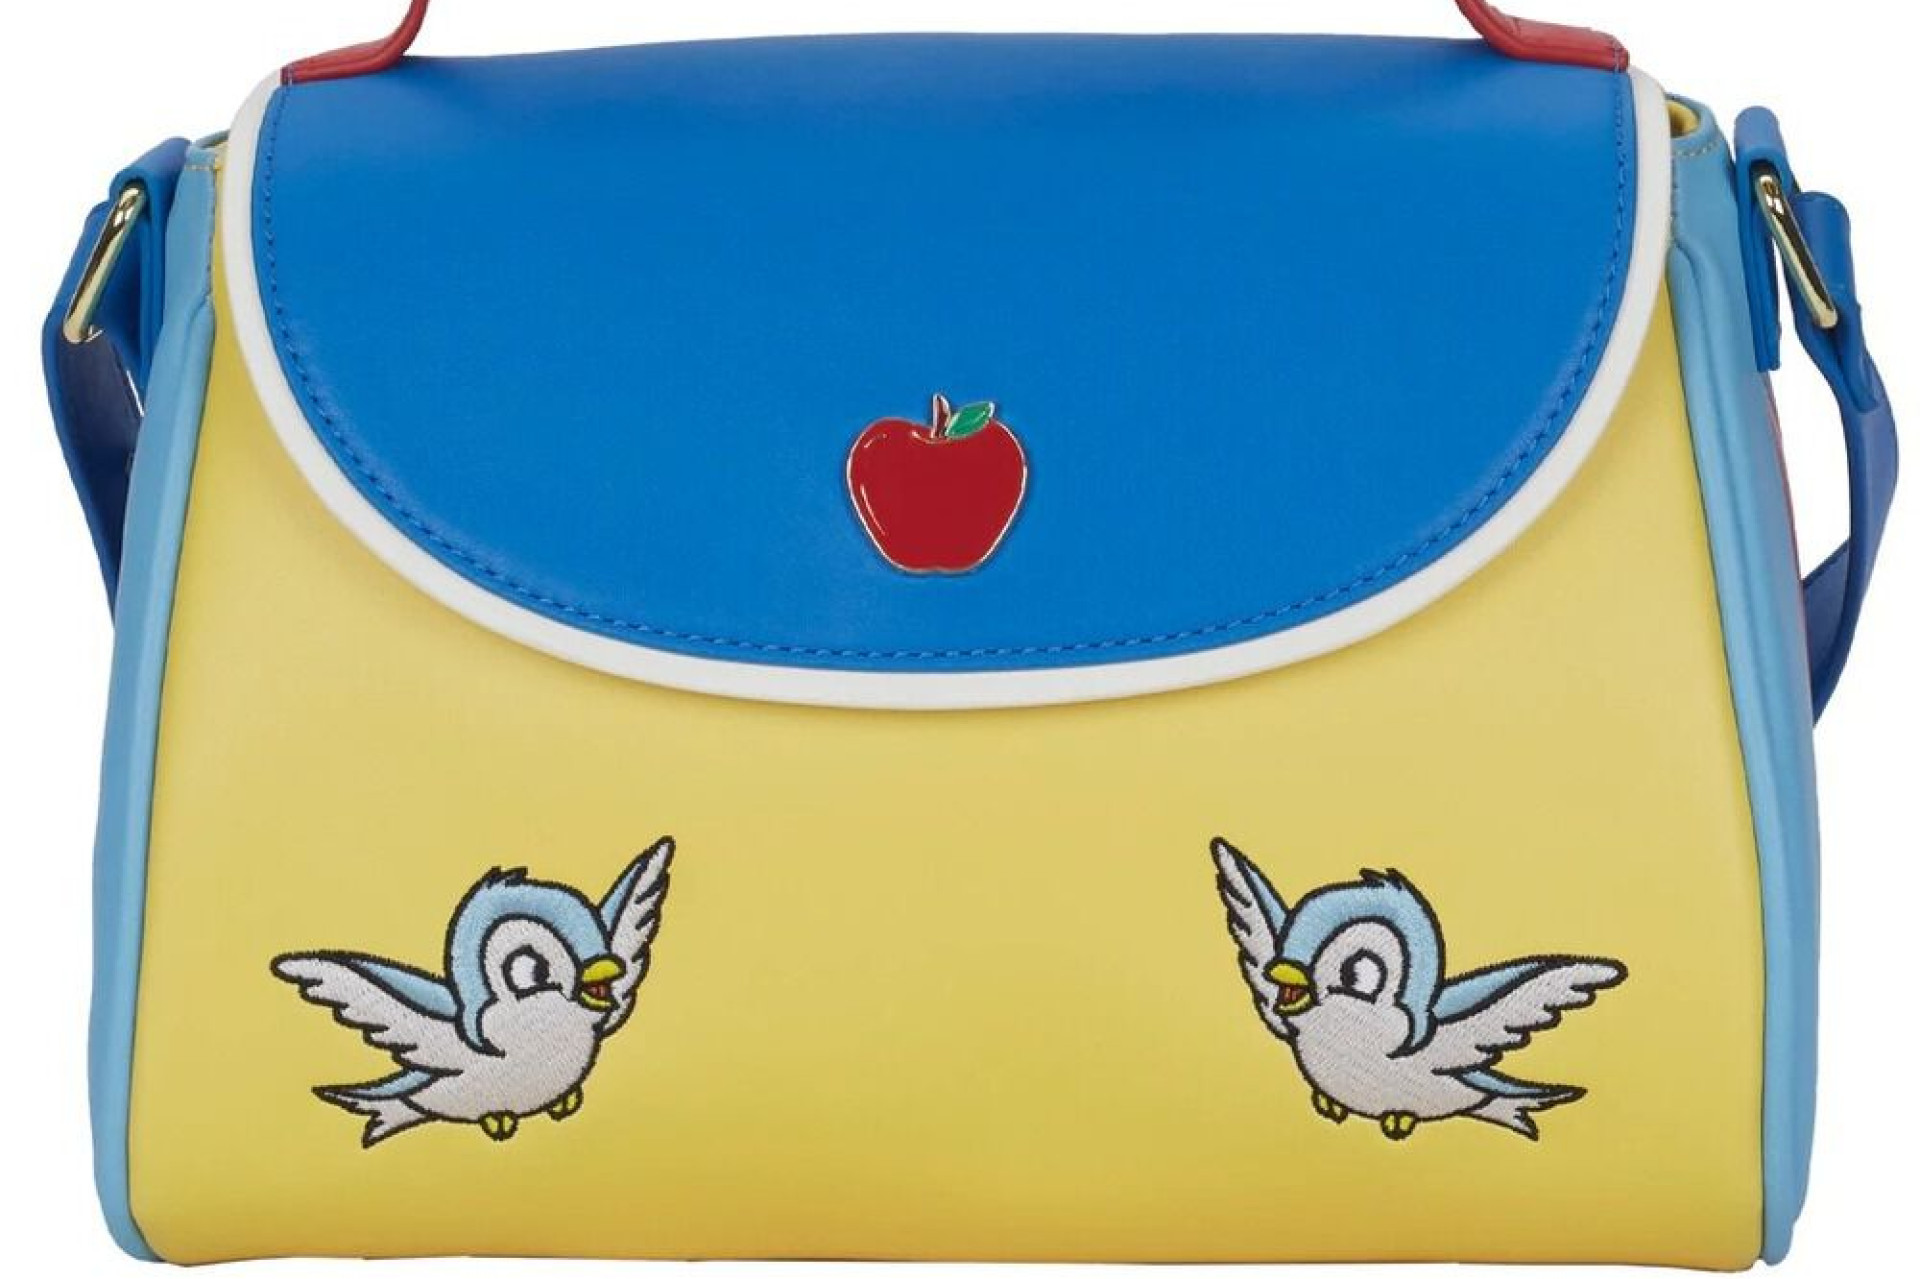 Acheter Sac A Mains Loungefly - Blanche Neige - Robe